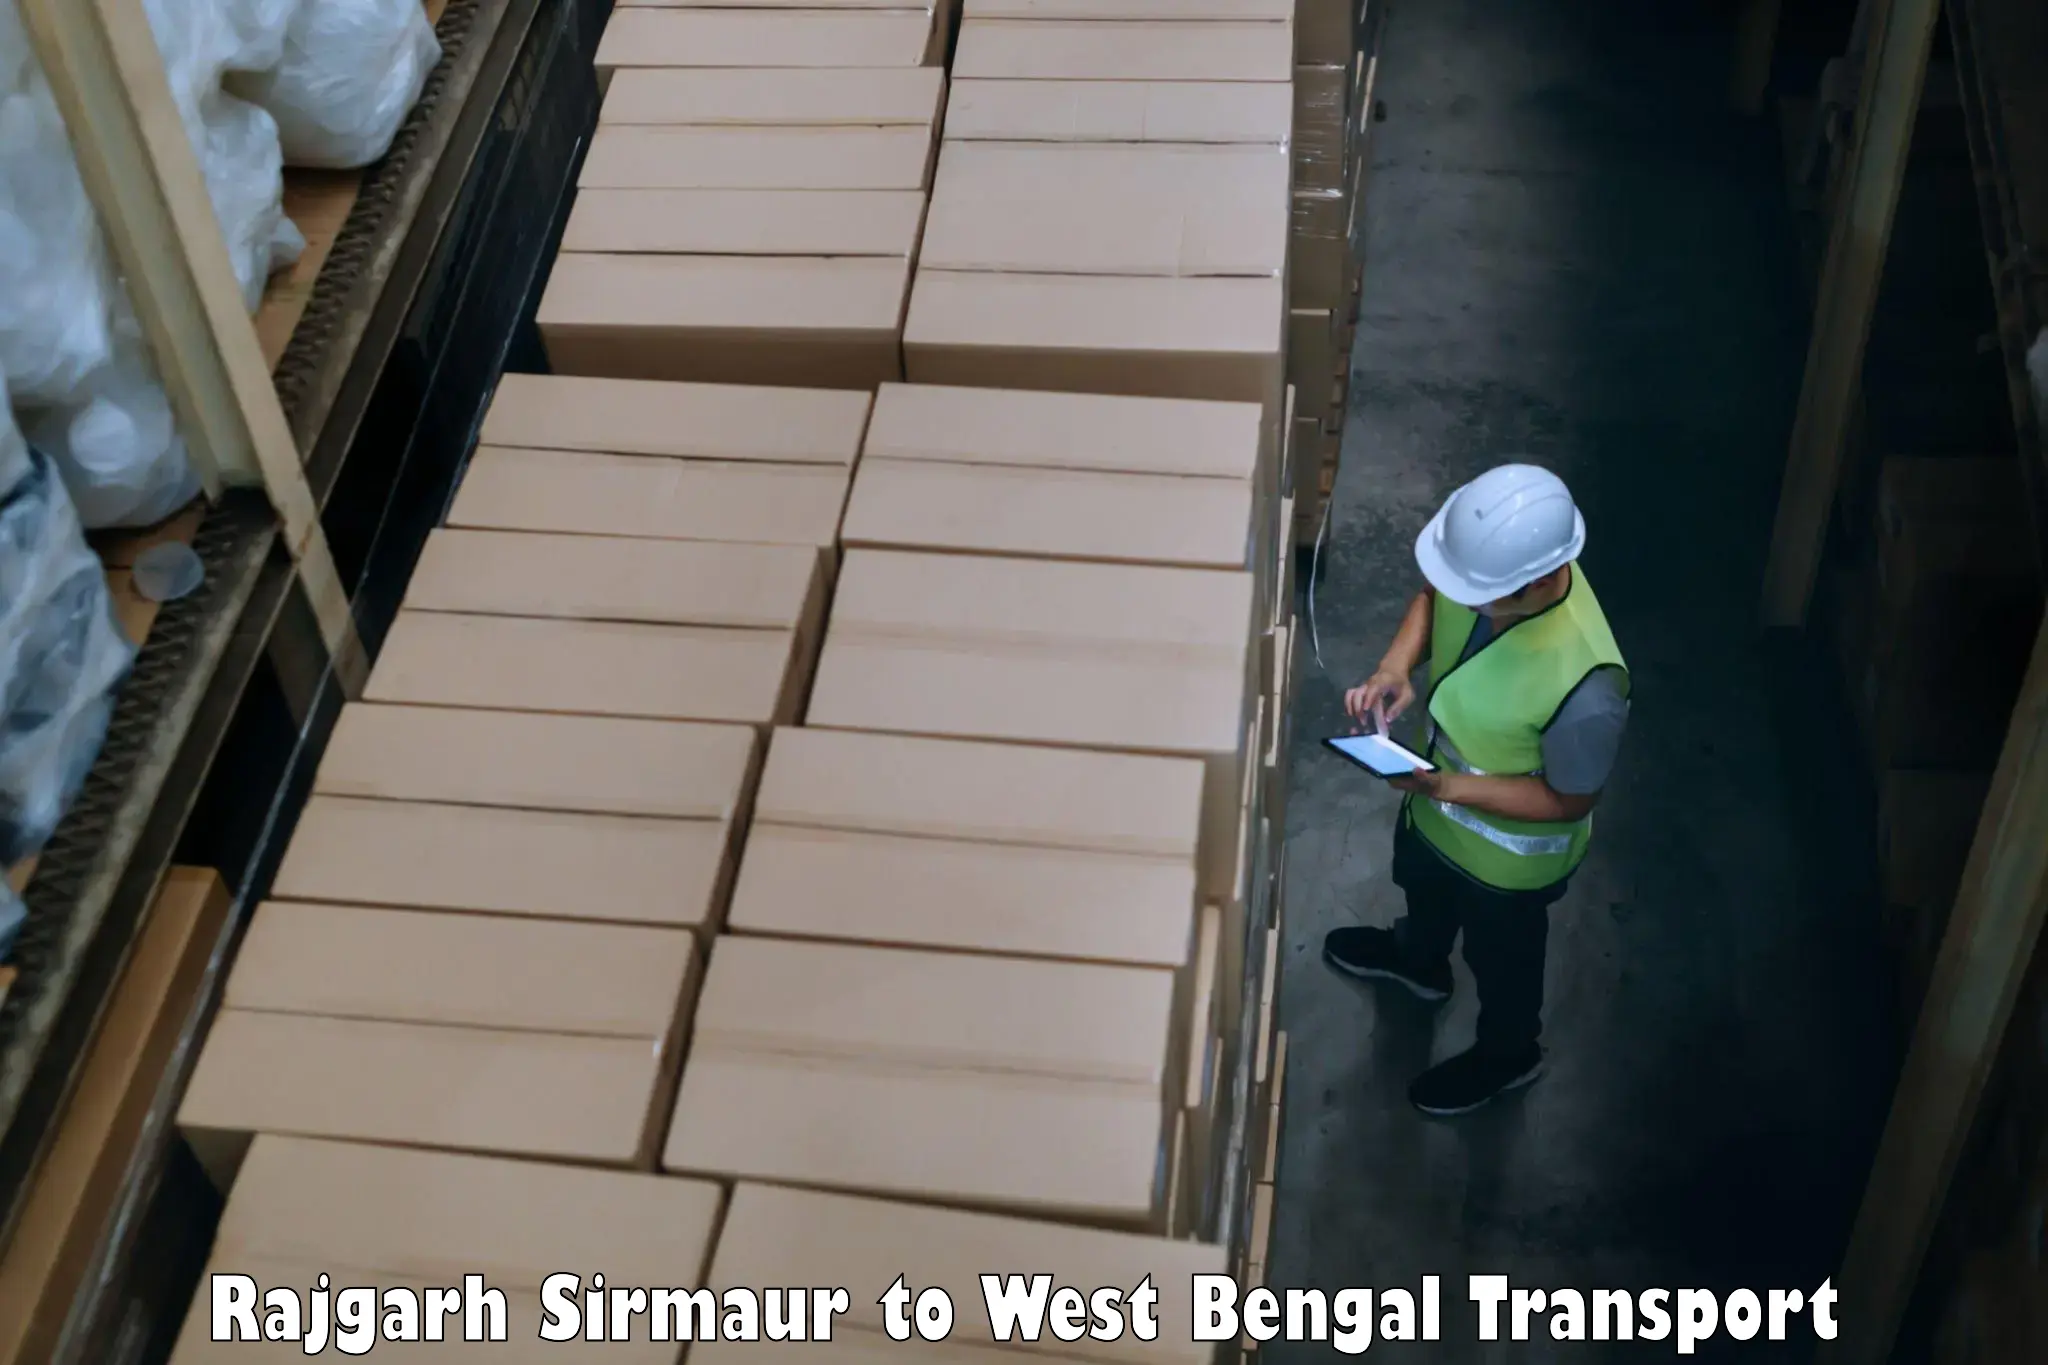 Nationwide transport services Rajgarh Sirmaur to Barrackpore